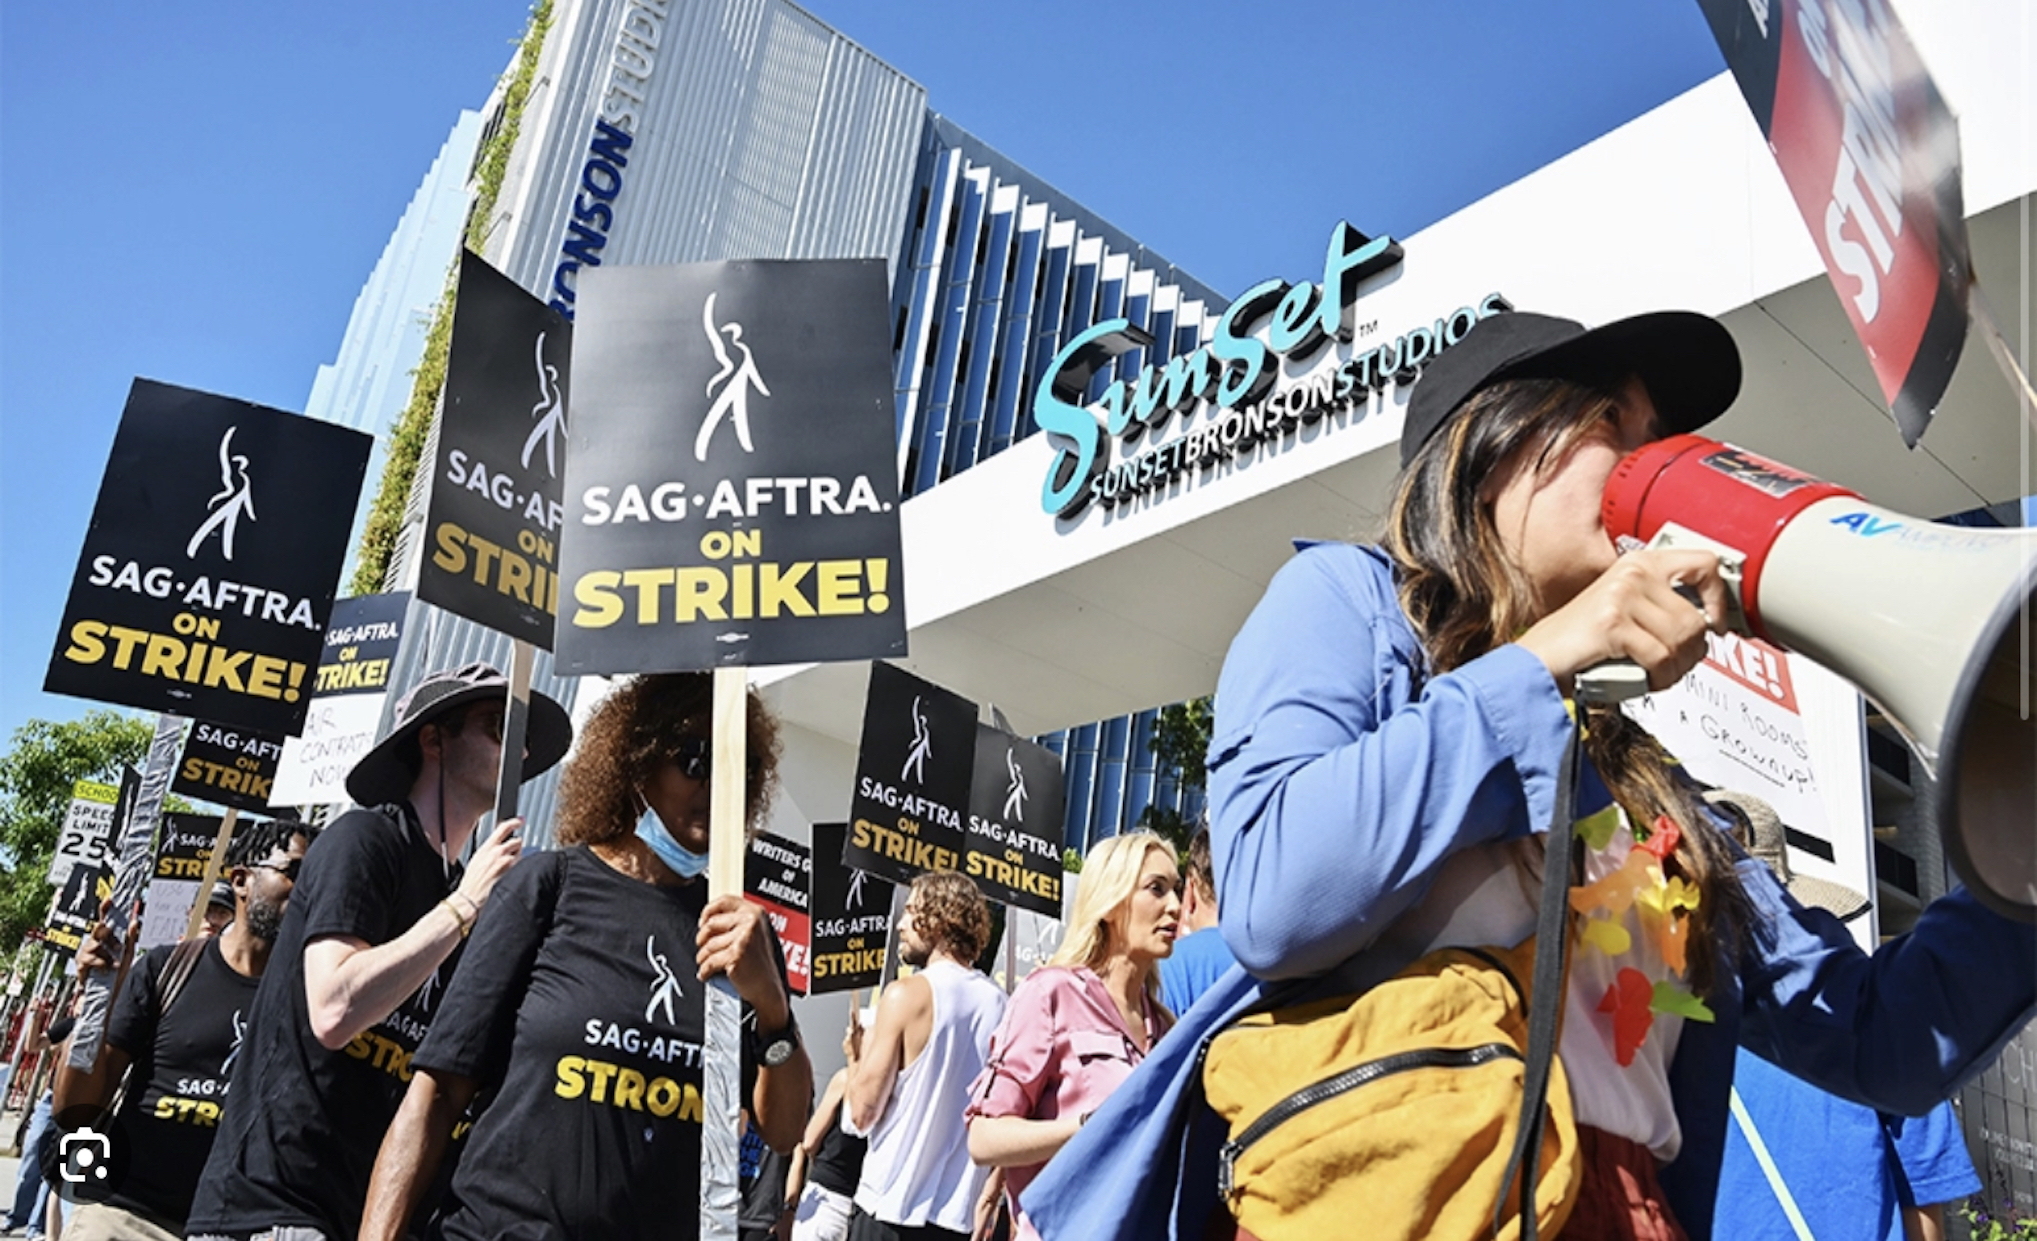 Protesters holding signs representing the unified stance of SAG-AFTRA and WGA members against AMPTP policies.